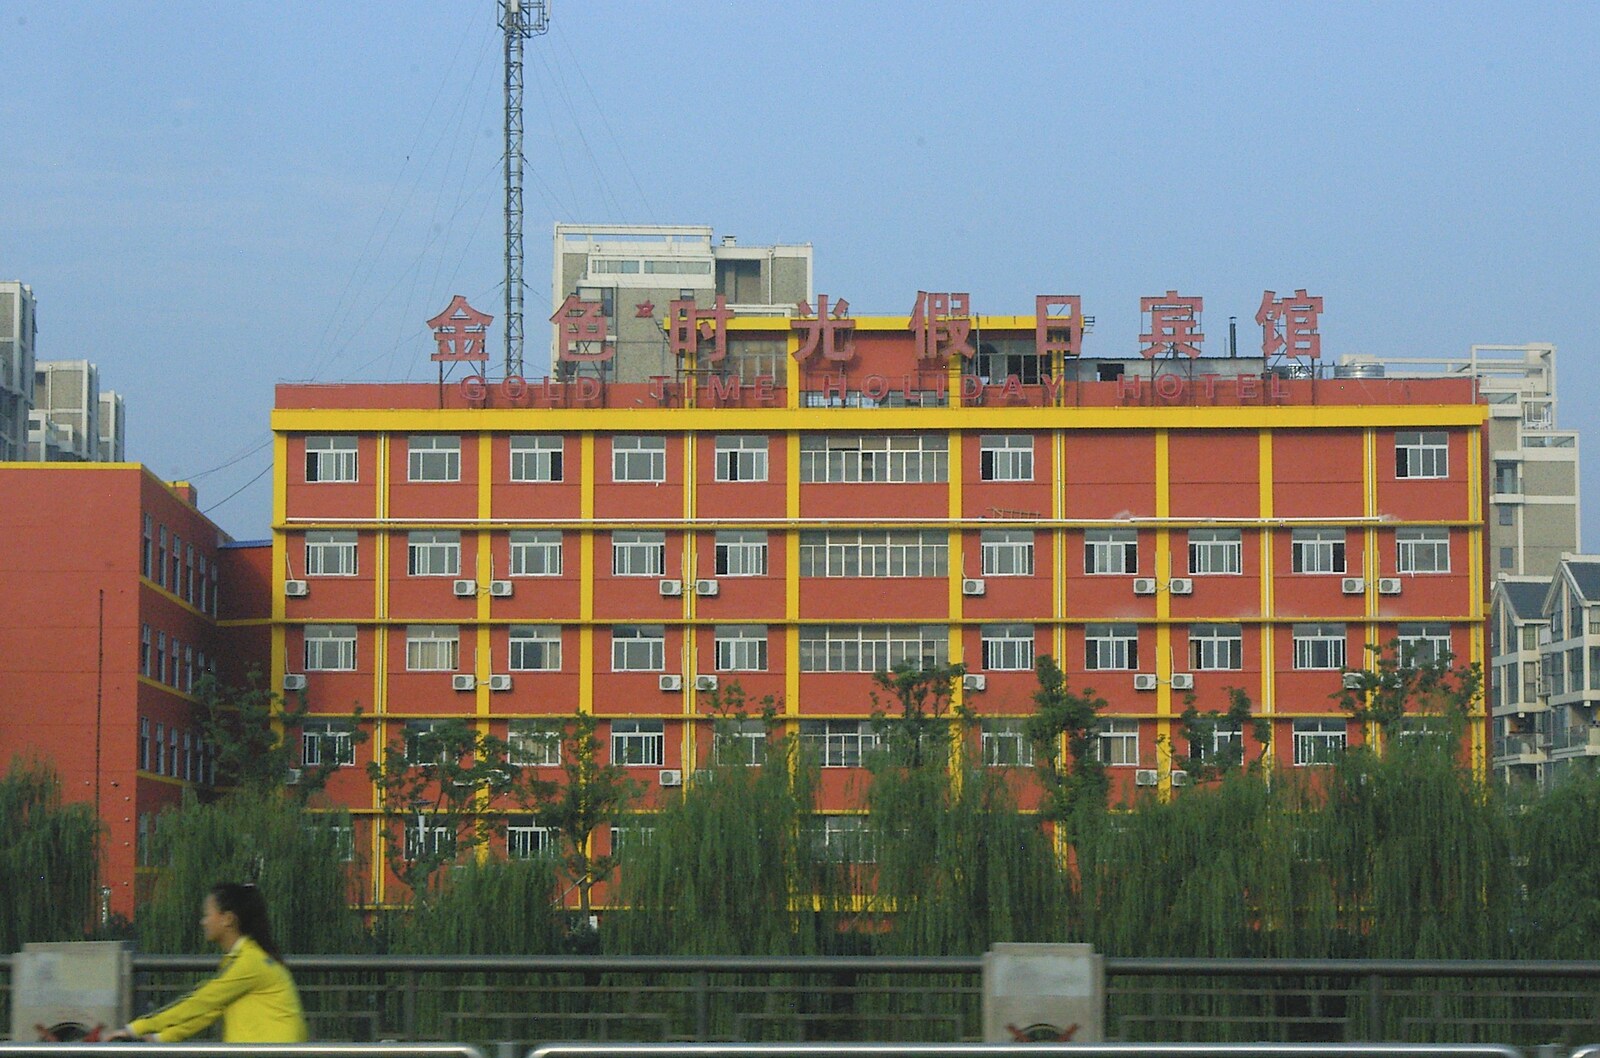 Red and yellow apartment block from A Few Days in Nanjing, Jiangsu Province, China - 7th October 2006